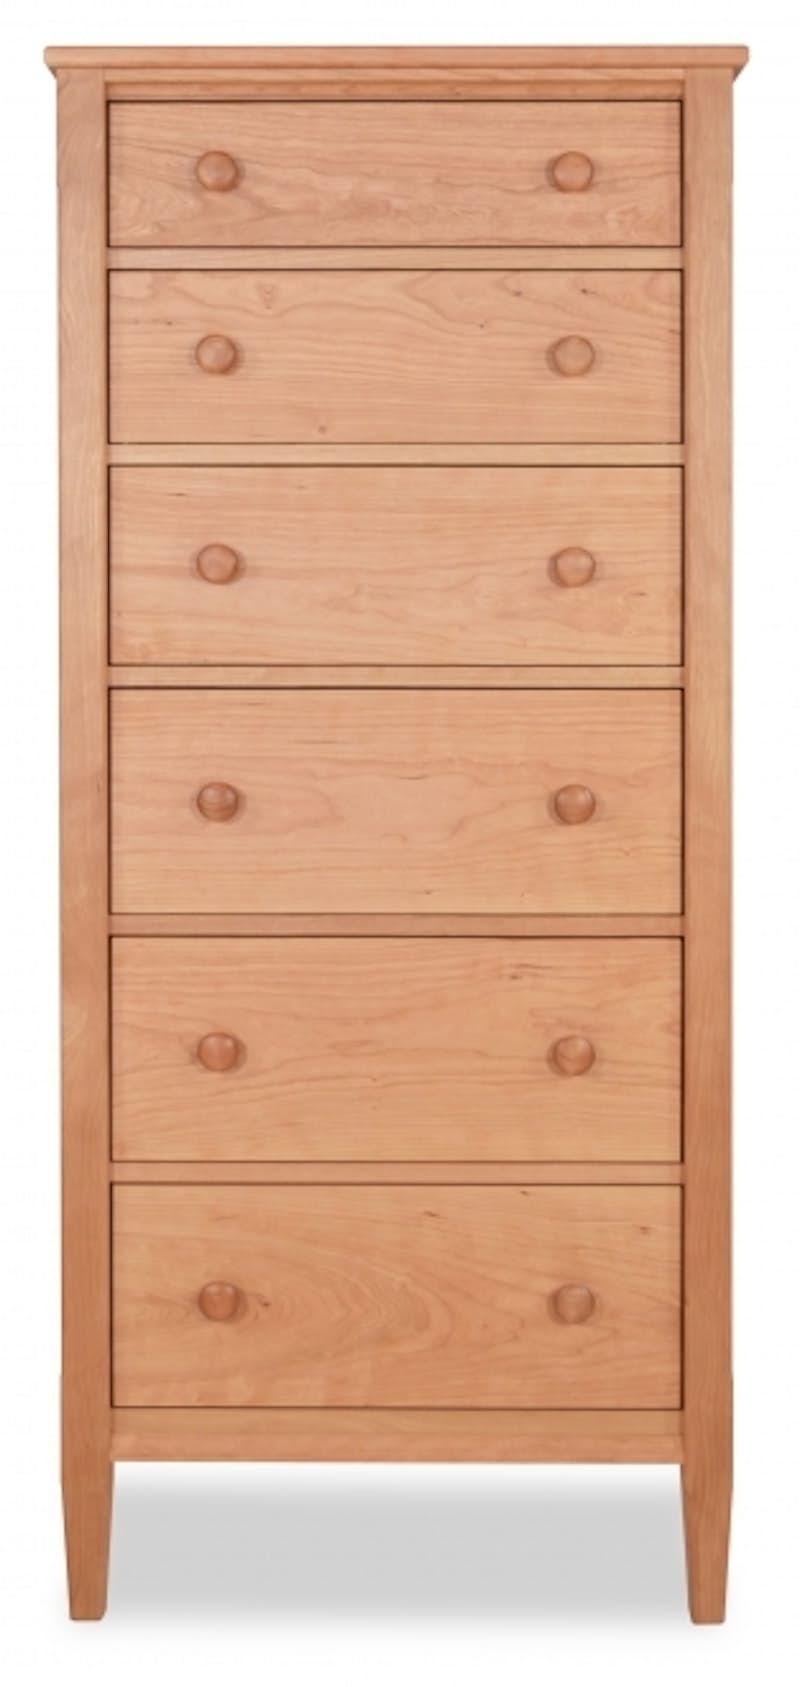 6DCSH-LING 6 Drawer Lingerie Chest